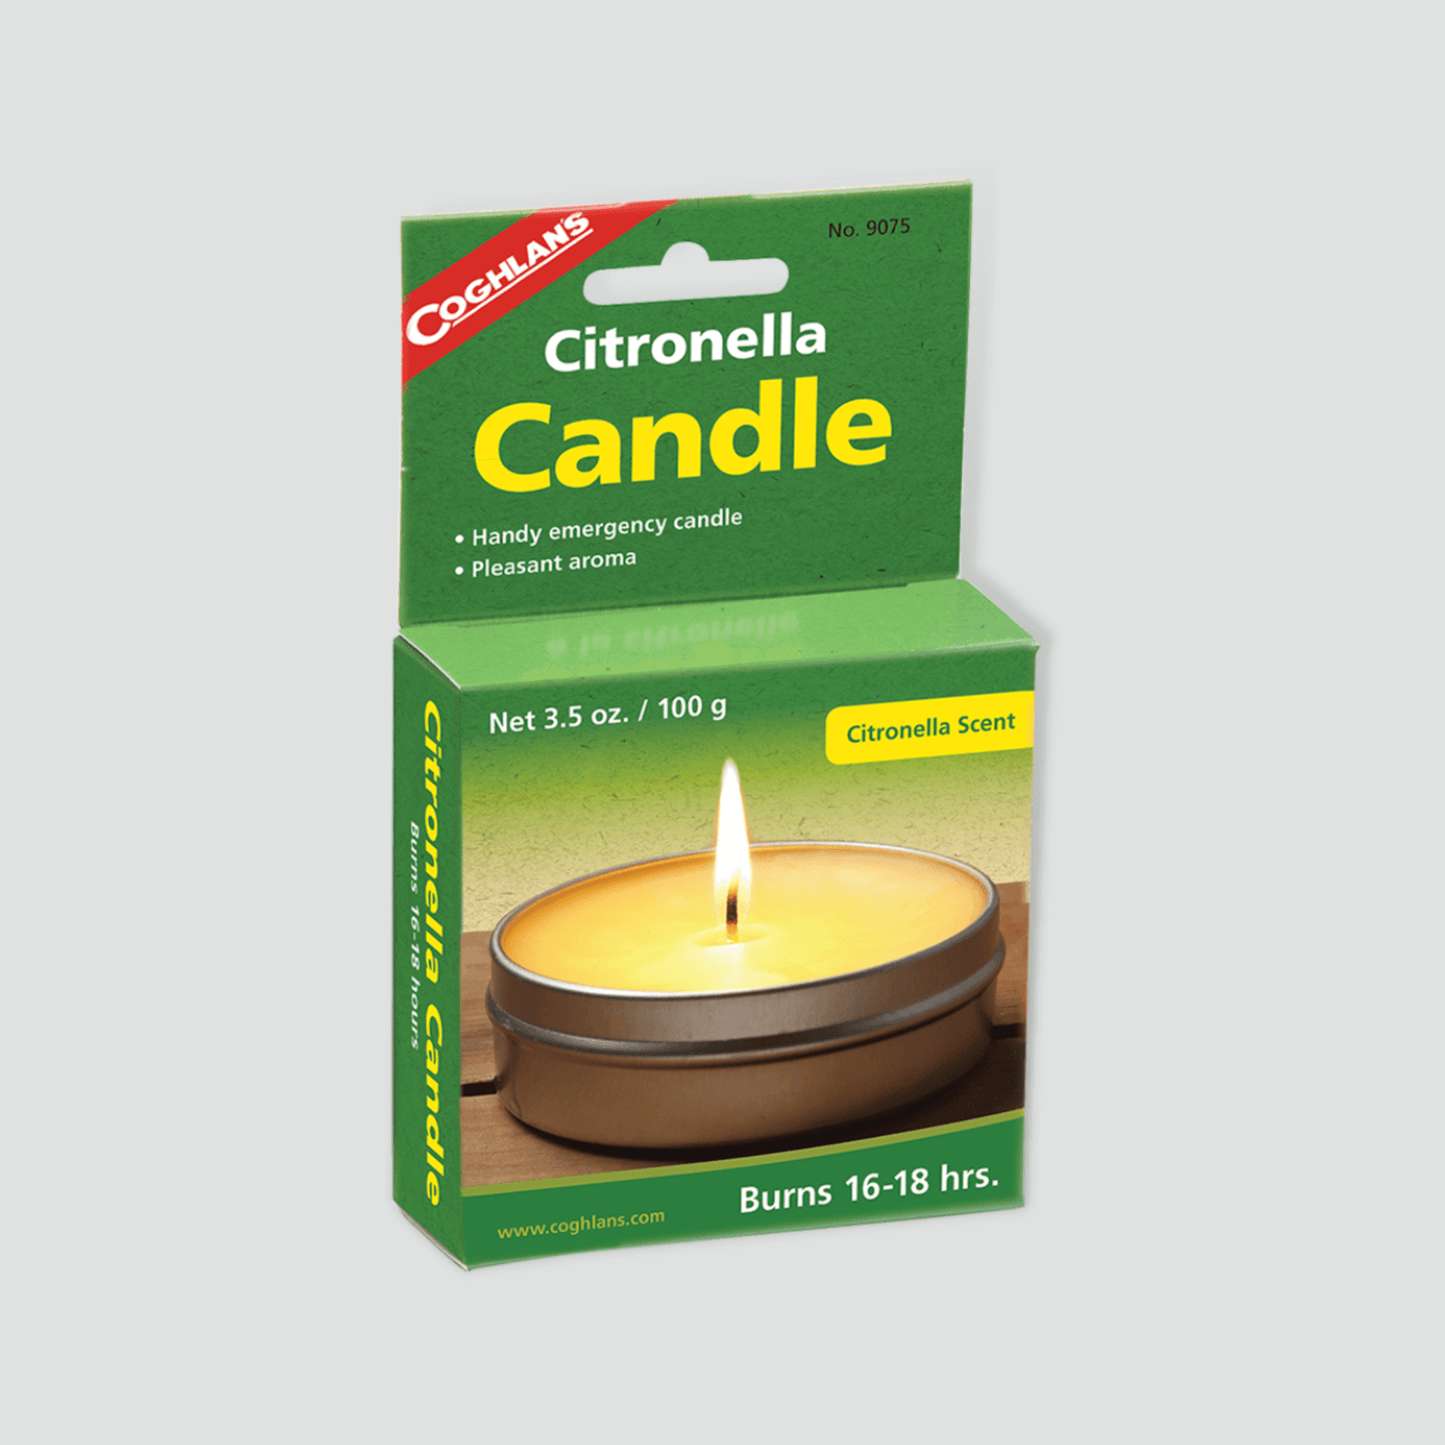 Citronella Candle in packaging